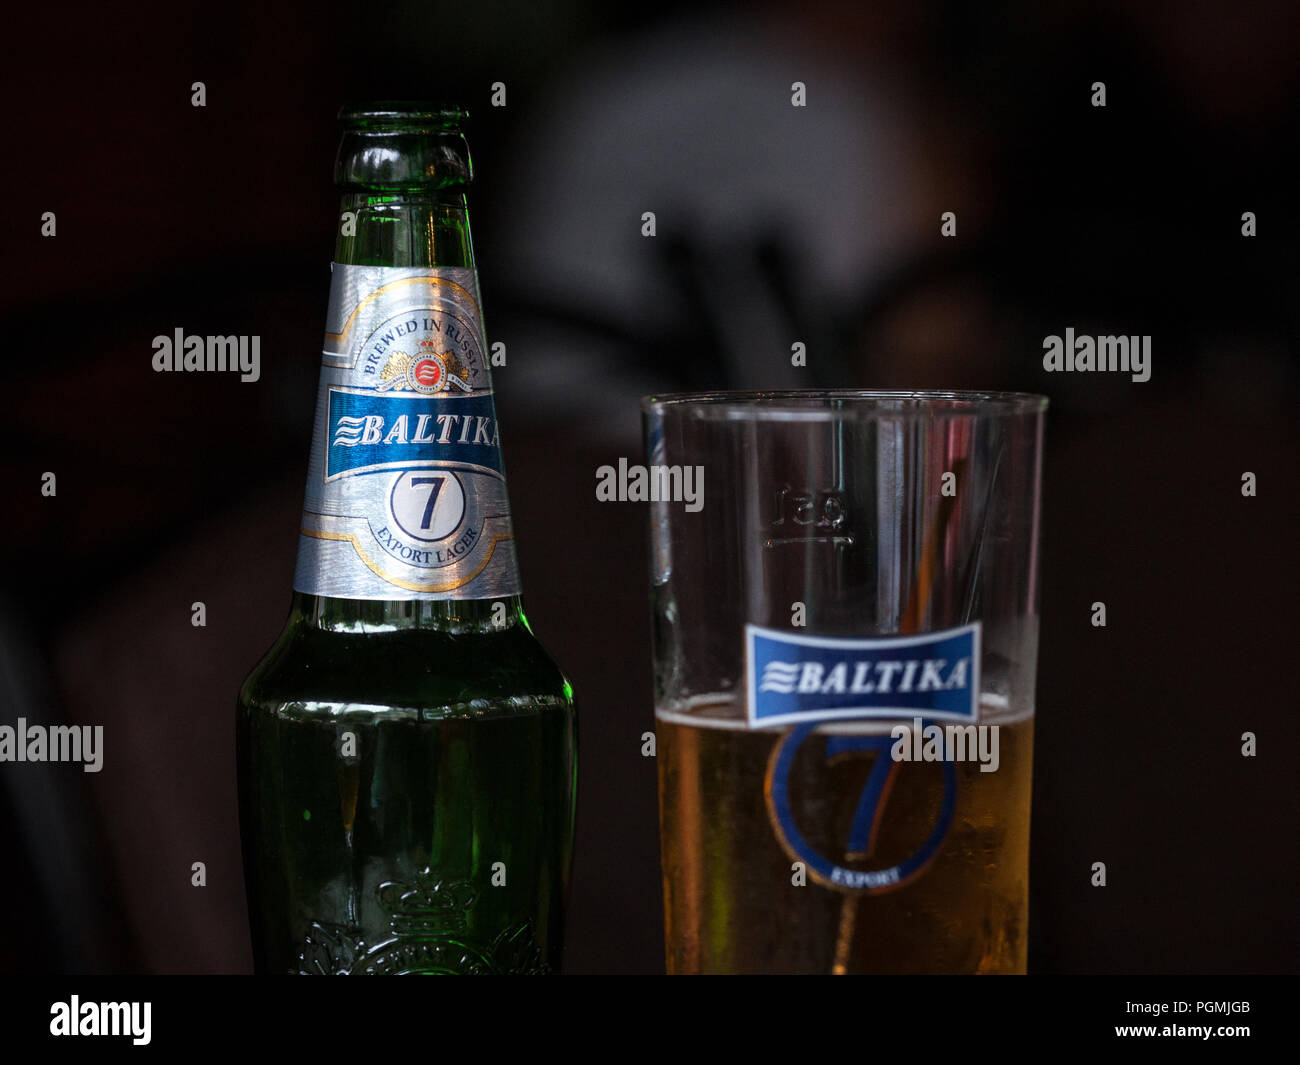 BELGRADE, SERBIA - AUGUST 26, 2018:  Baltika 7 logo on on a beer bottle. Baltika 7 is a light lager, export style, brewed in Russia, and one of the sy Stock Photo